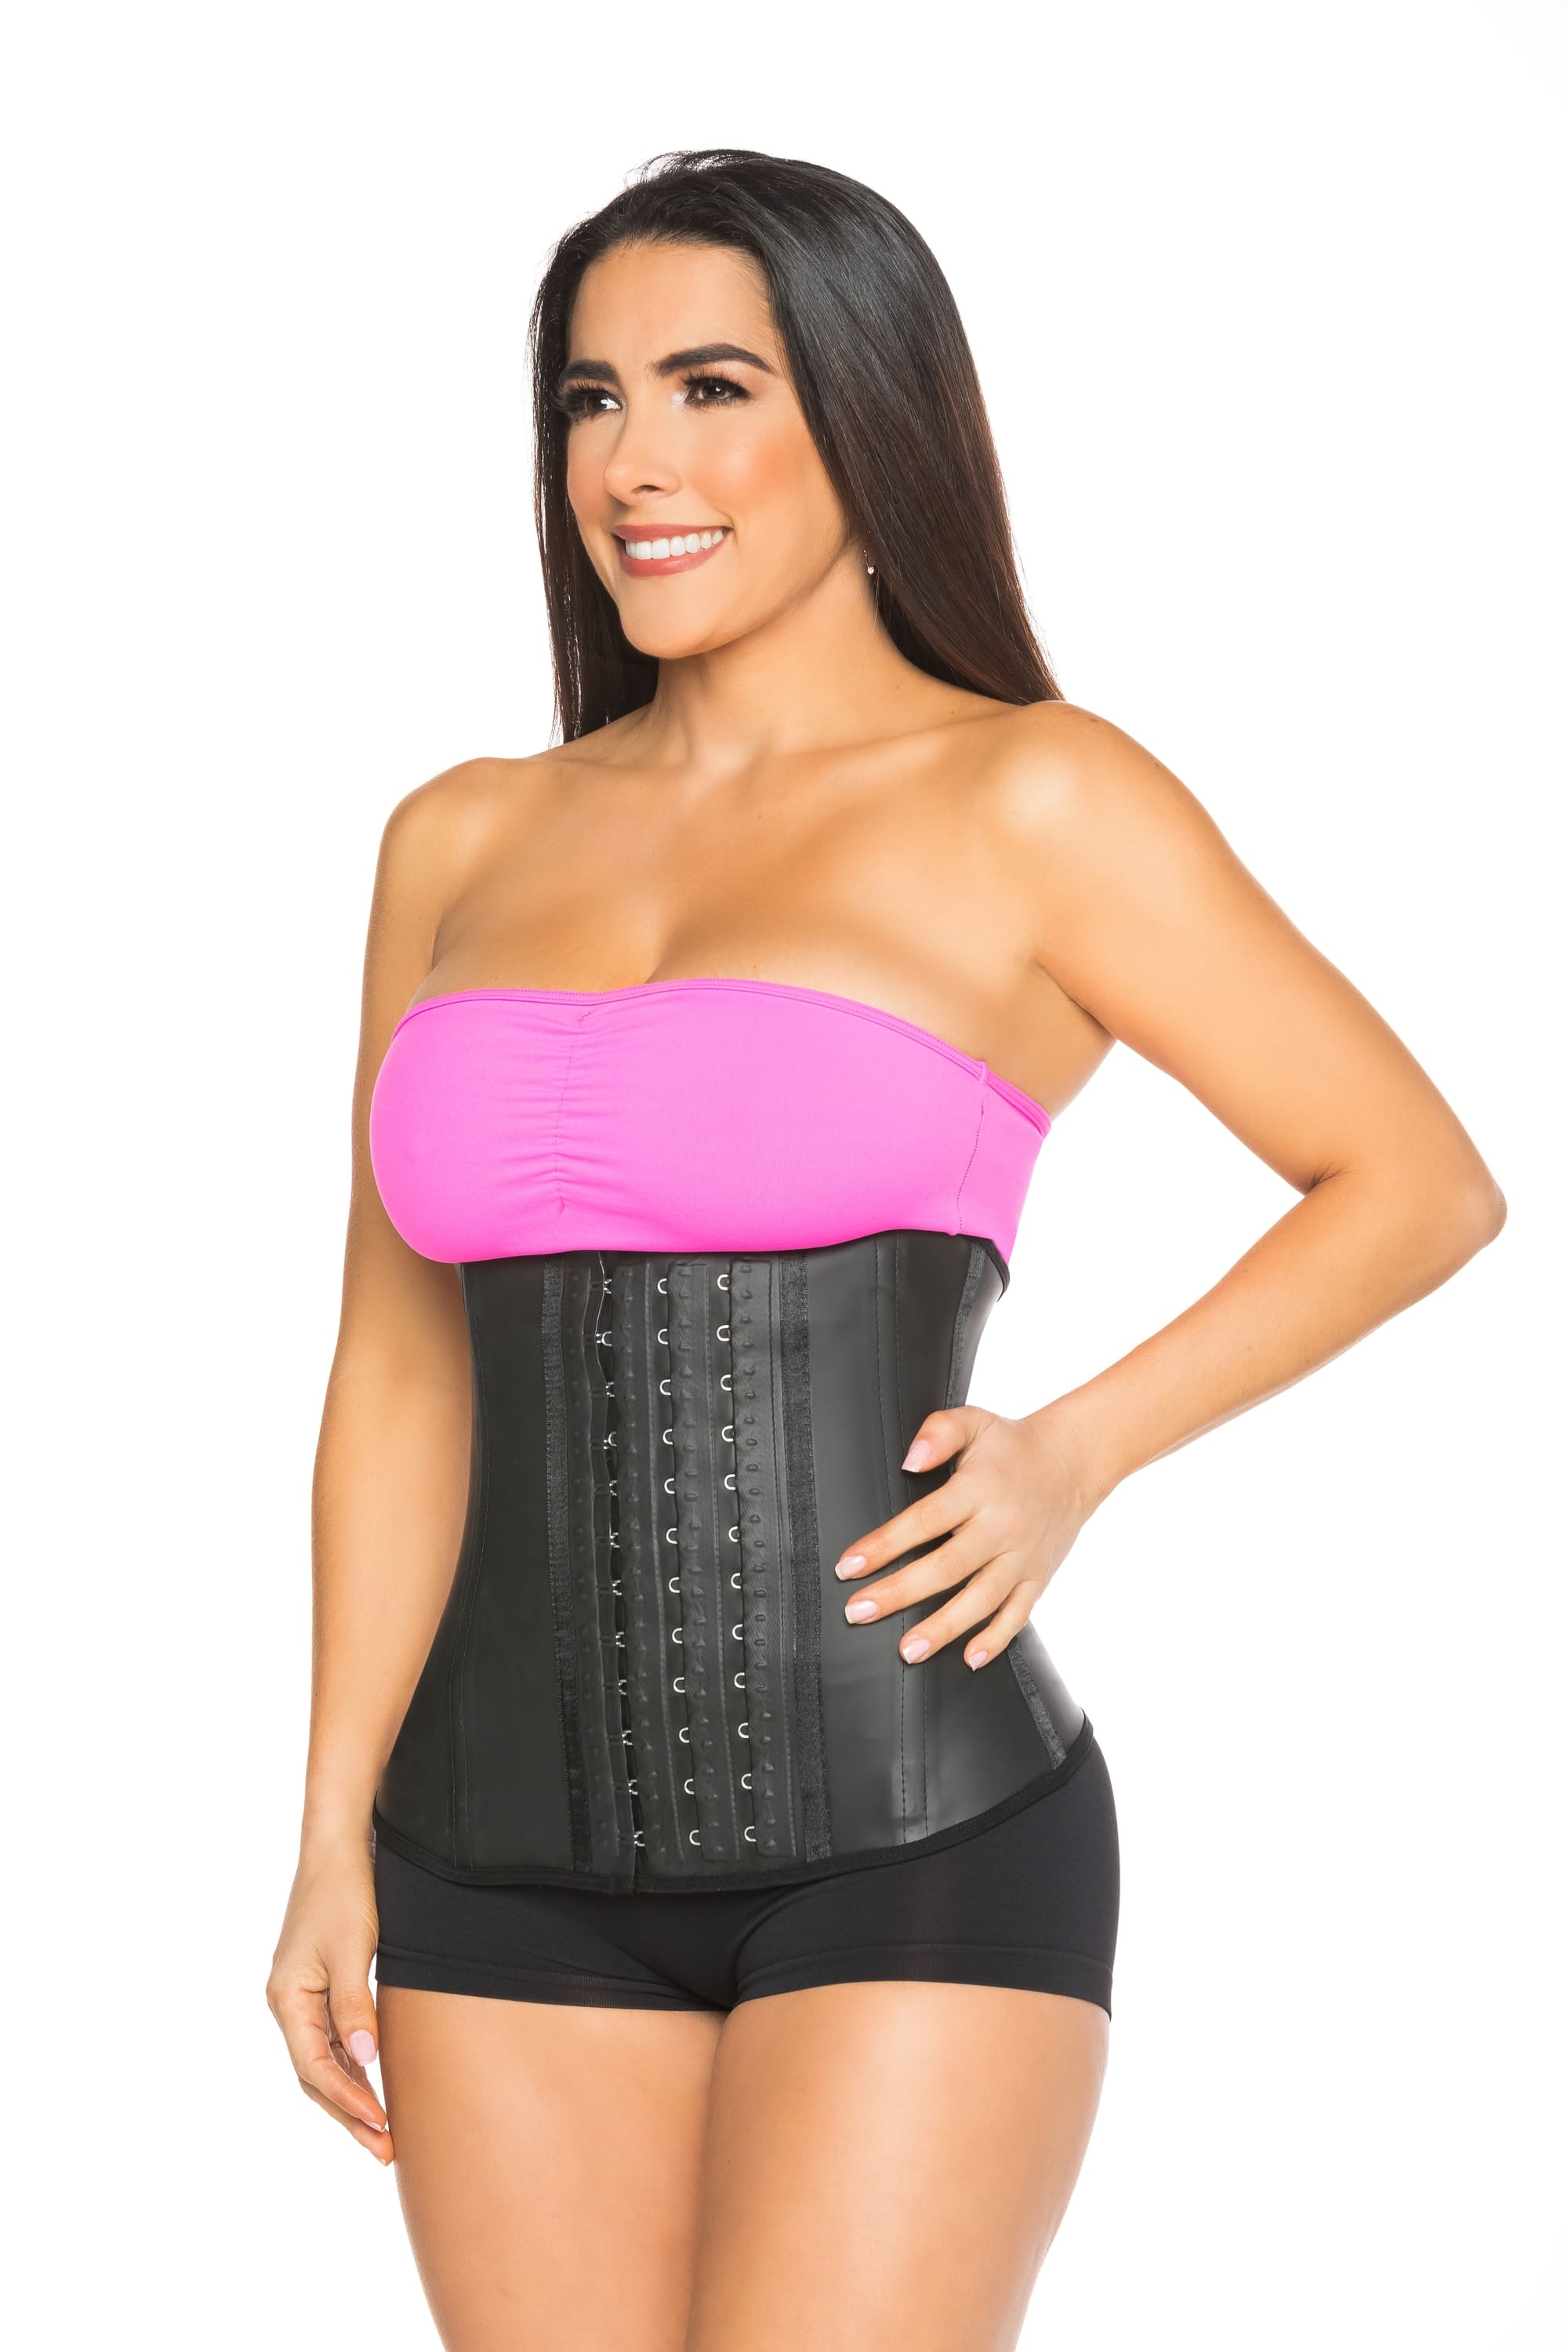 External latex waist trainer specially designed to define your curves.  Reduce measures in waist and abdomen. The easiest way to have a body with  defined curves. – Barby's Boutique